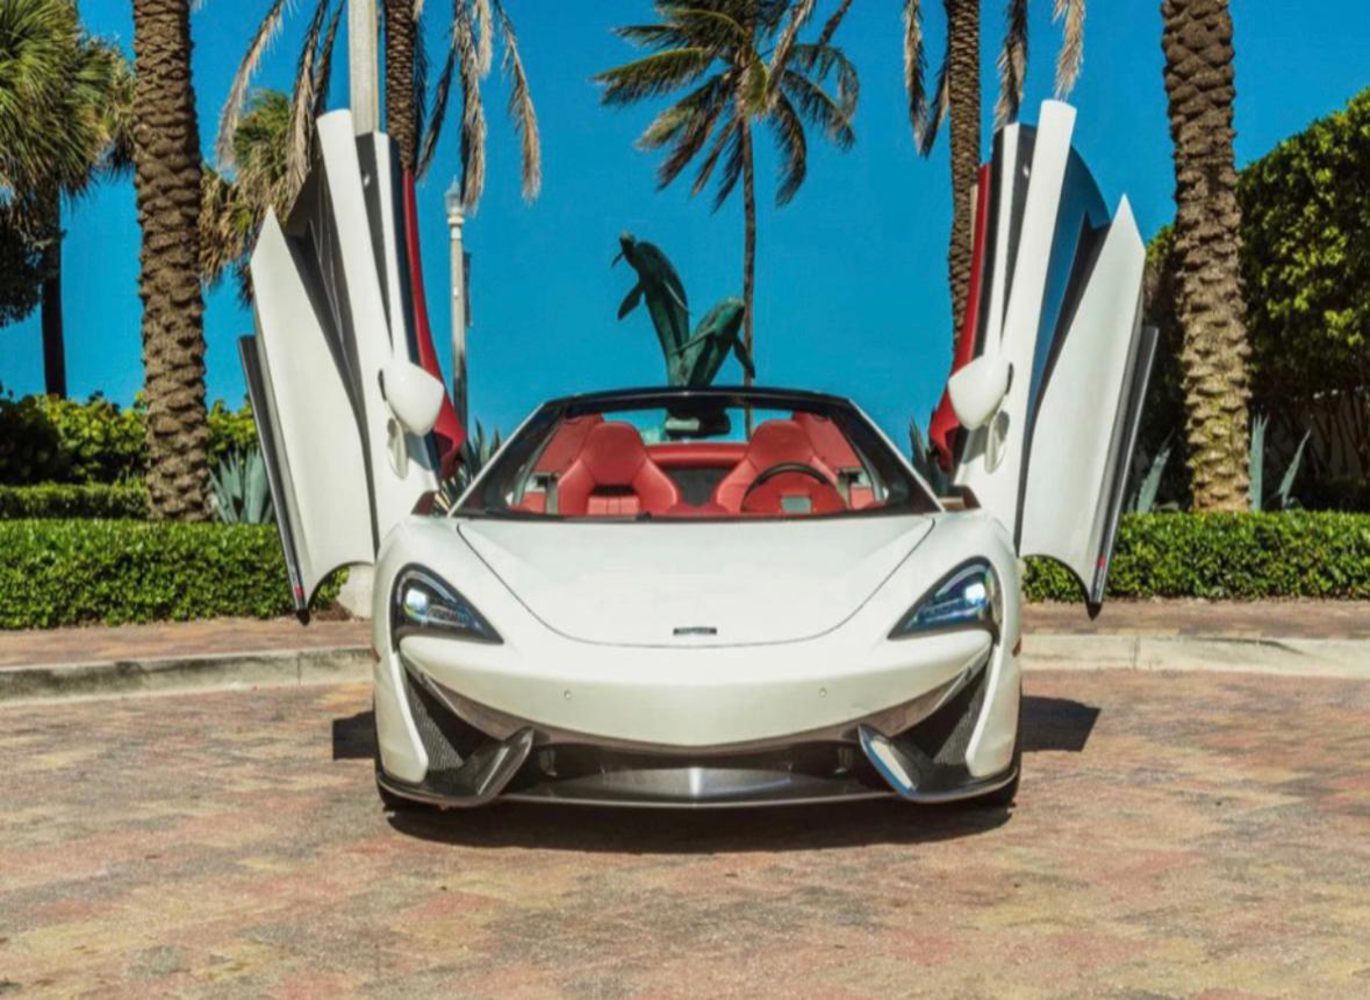 Top Luxury Car Models for Rent in Miami